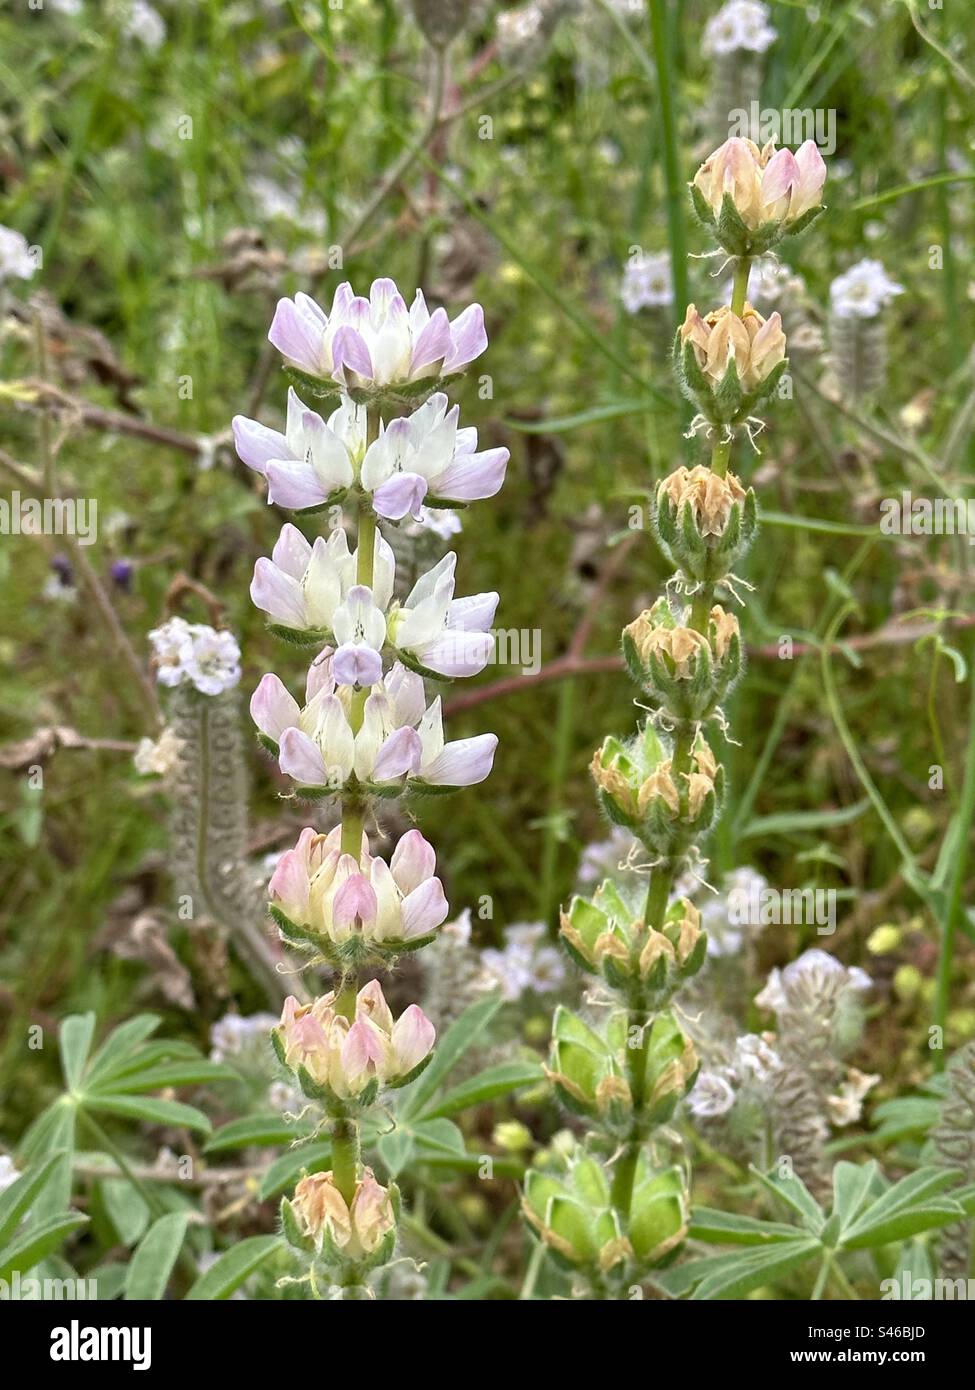 Lupinus microcarpus (chick lupine) is a flowering plant native to western North America. Stock Photo